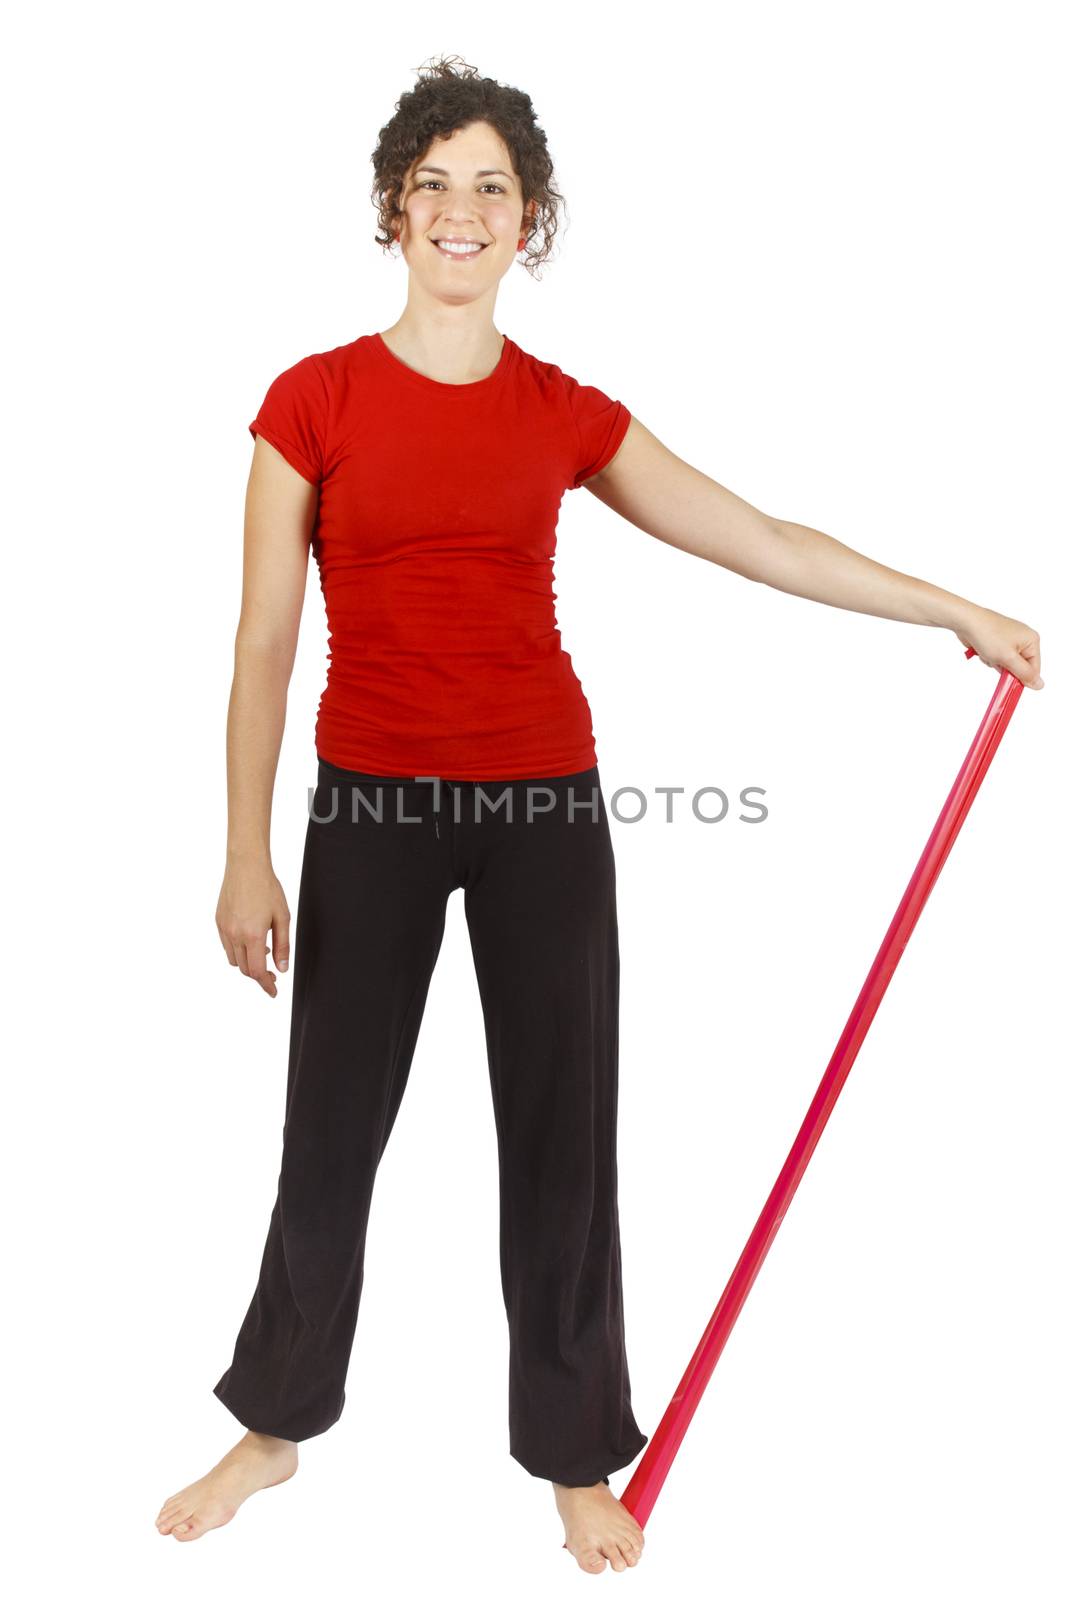 Young woman doing some exercise with an elastic ribbon.